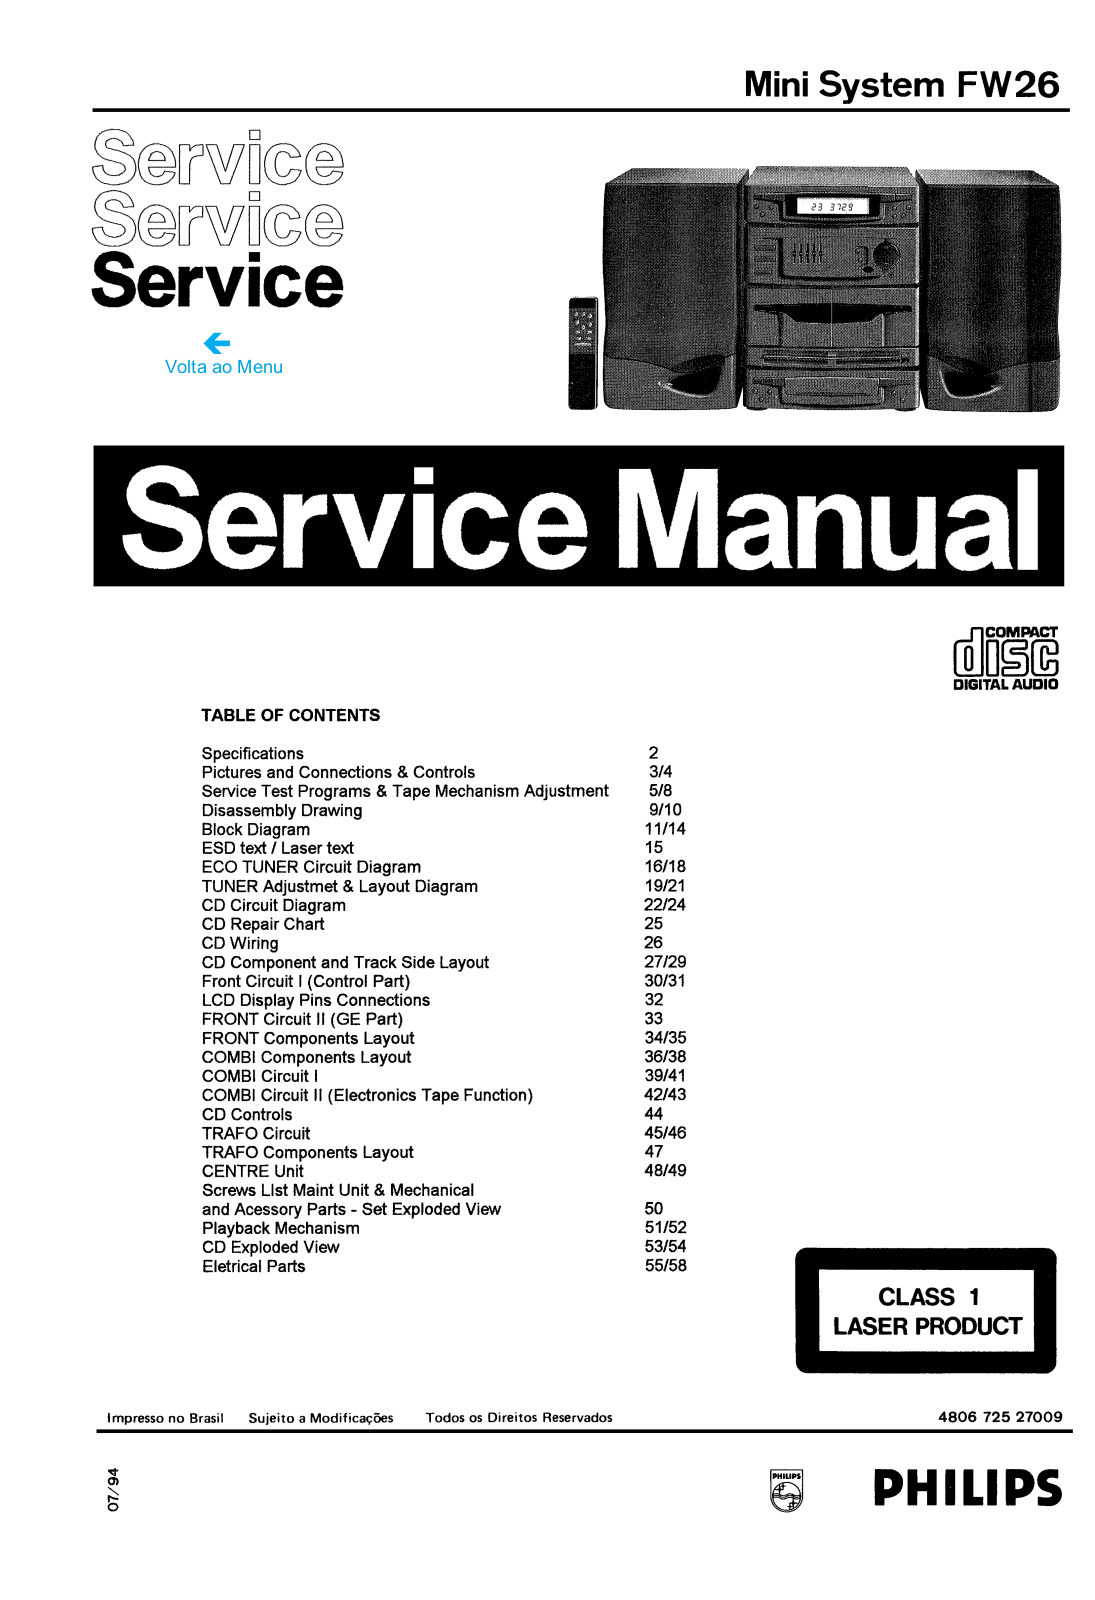 Philips FW-26 Service Manual